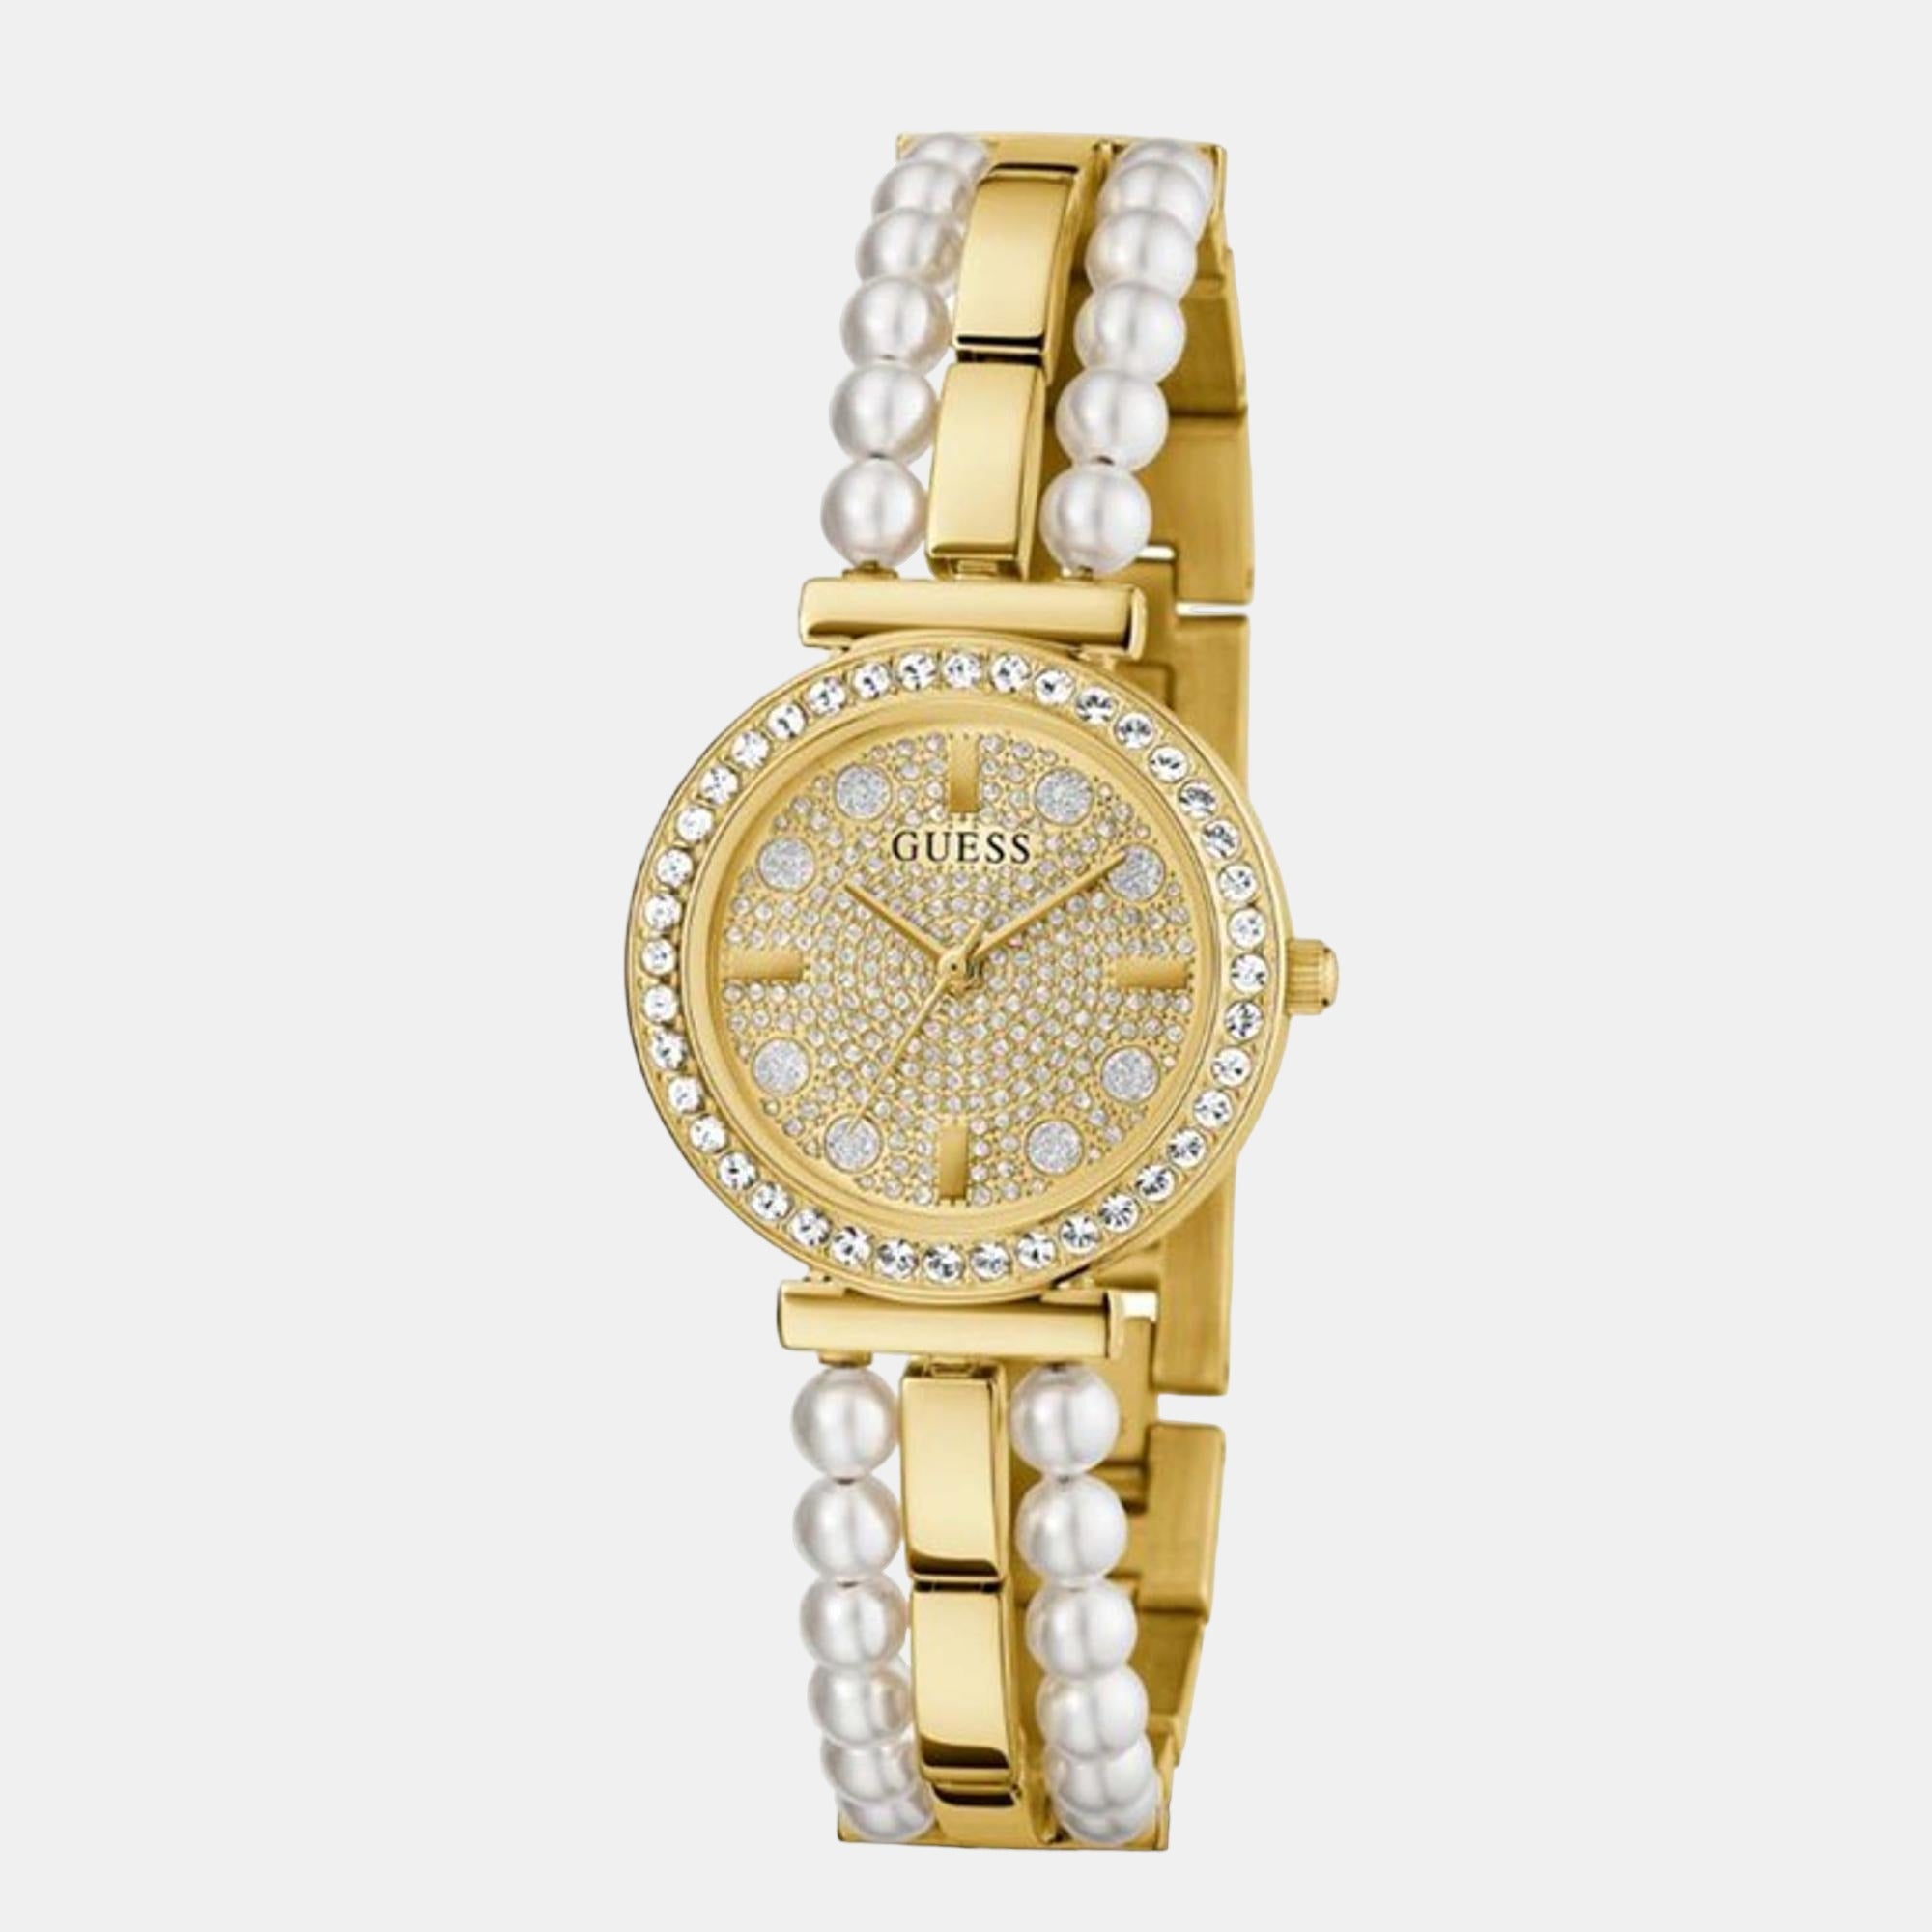 GUESS Ladies Rose Gold Tone Analog Watch - GW0668L3 | GUESS Watches US